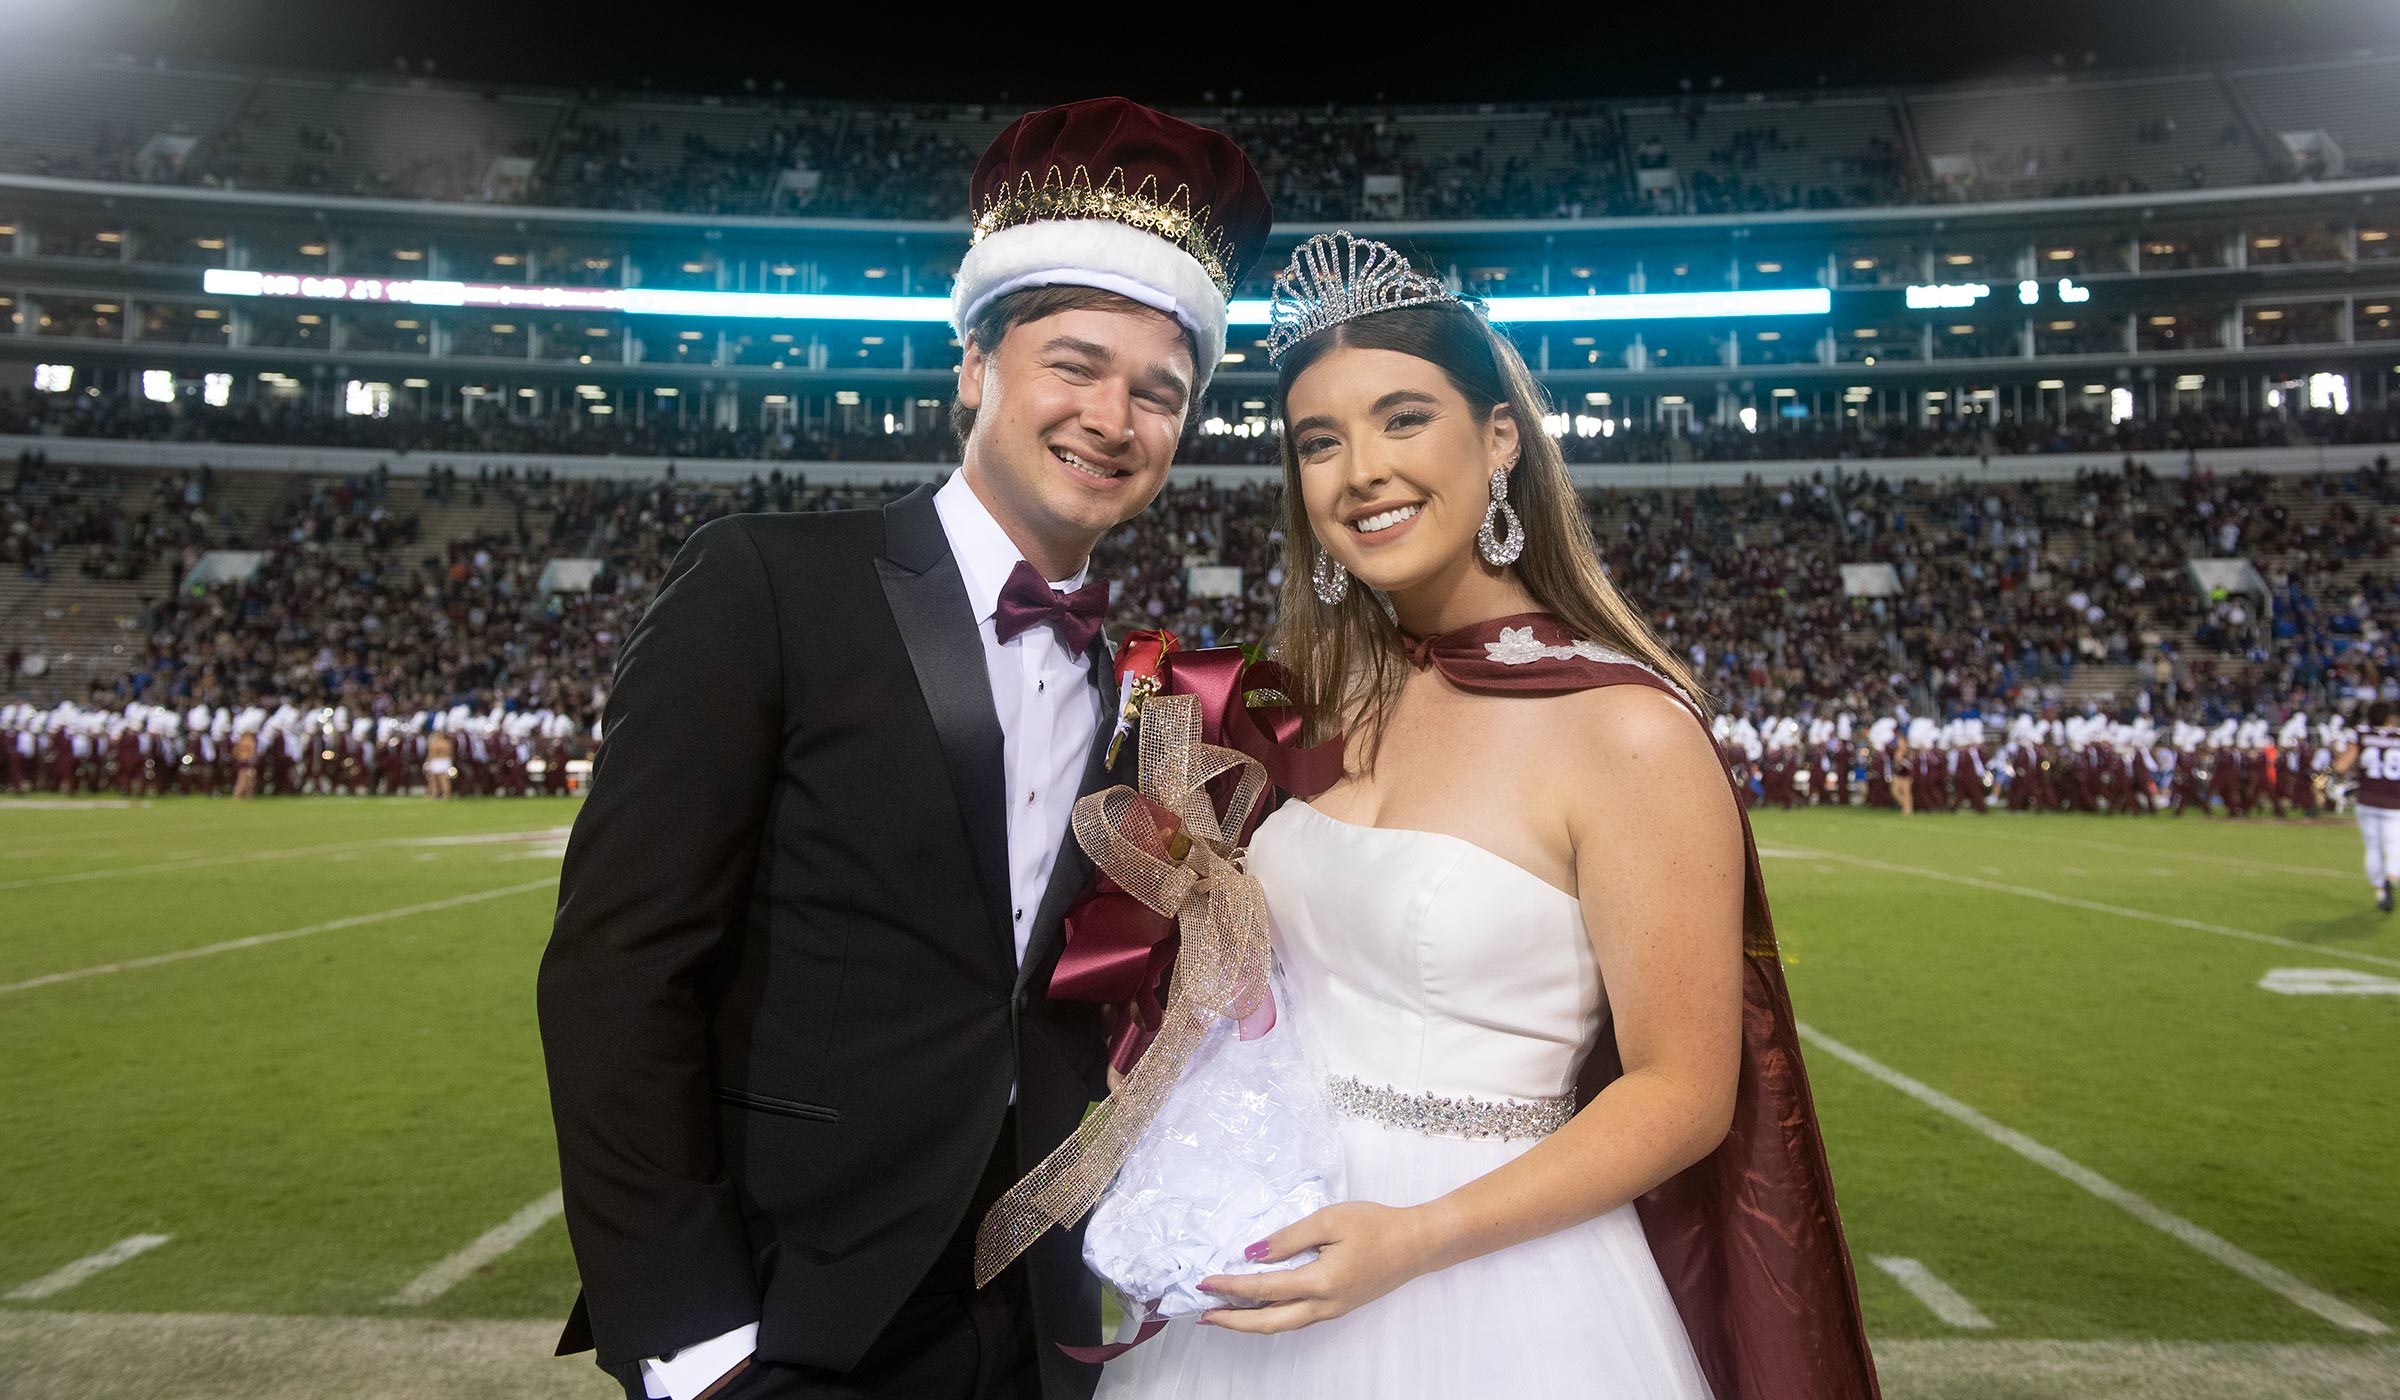 Guy in black tux with maroon bow tie and crown with female in white dress and crown on football field